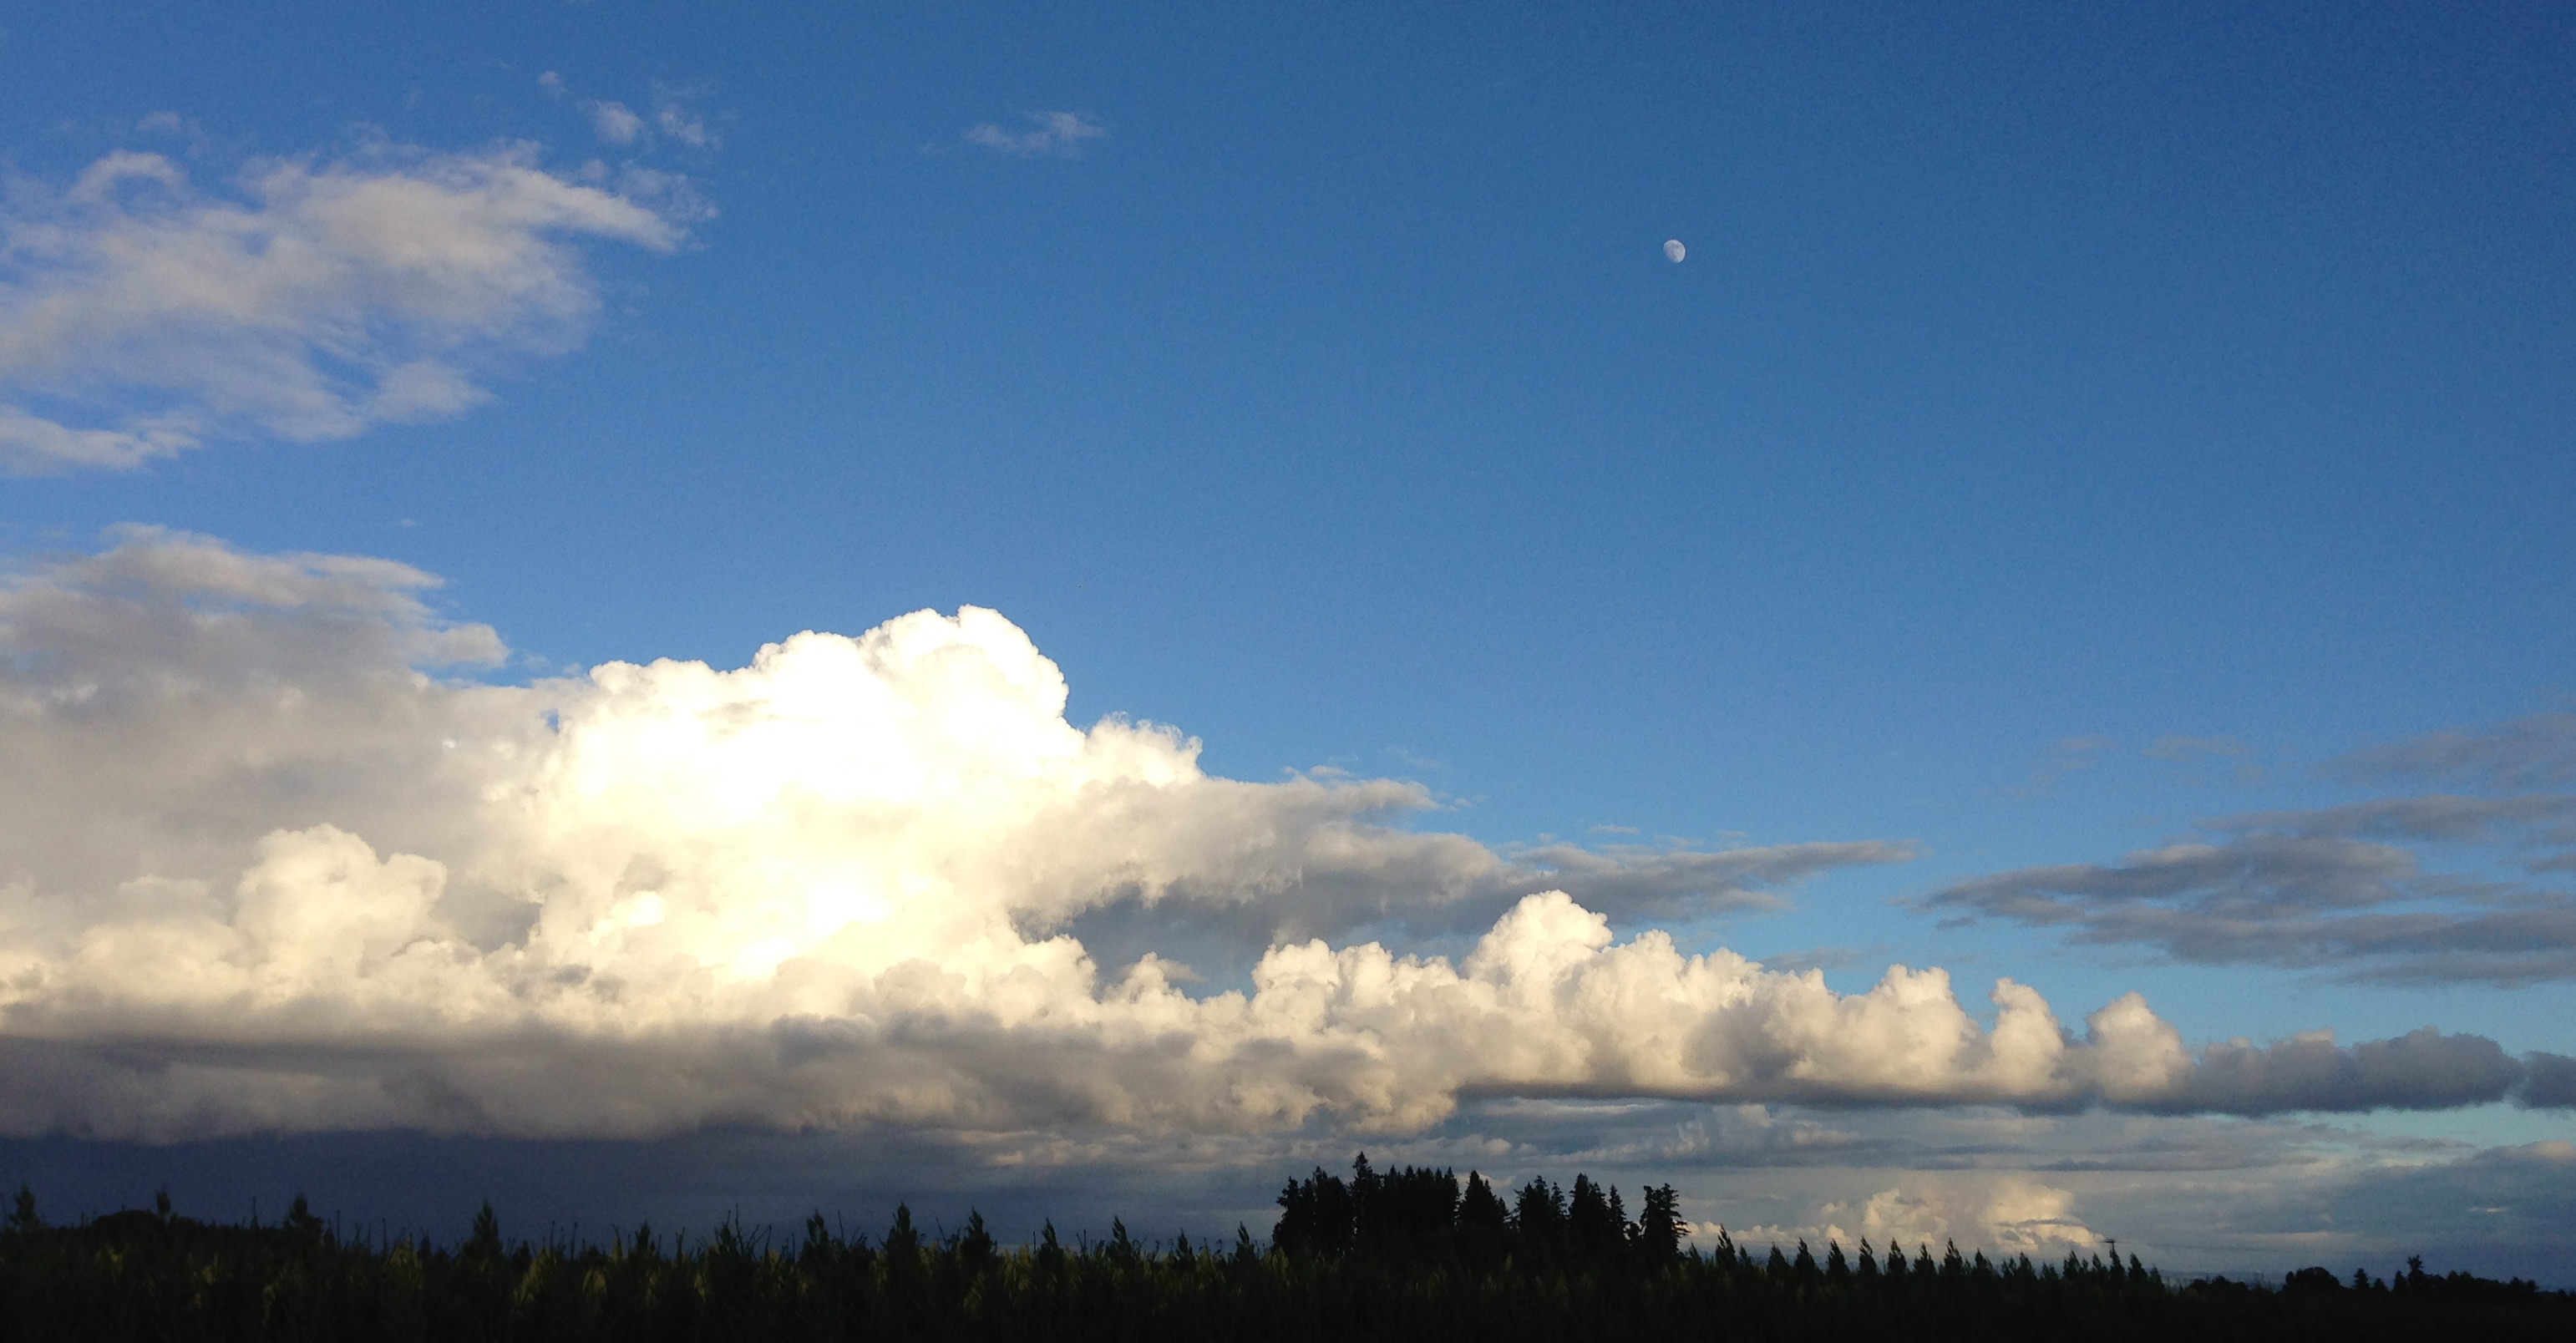 Yesterday's Cool Clouds and a Moon